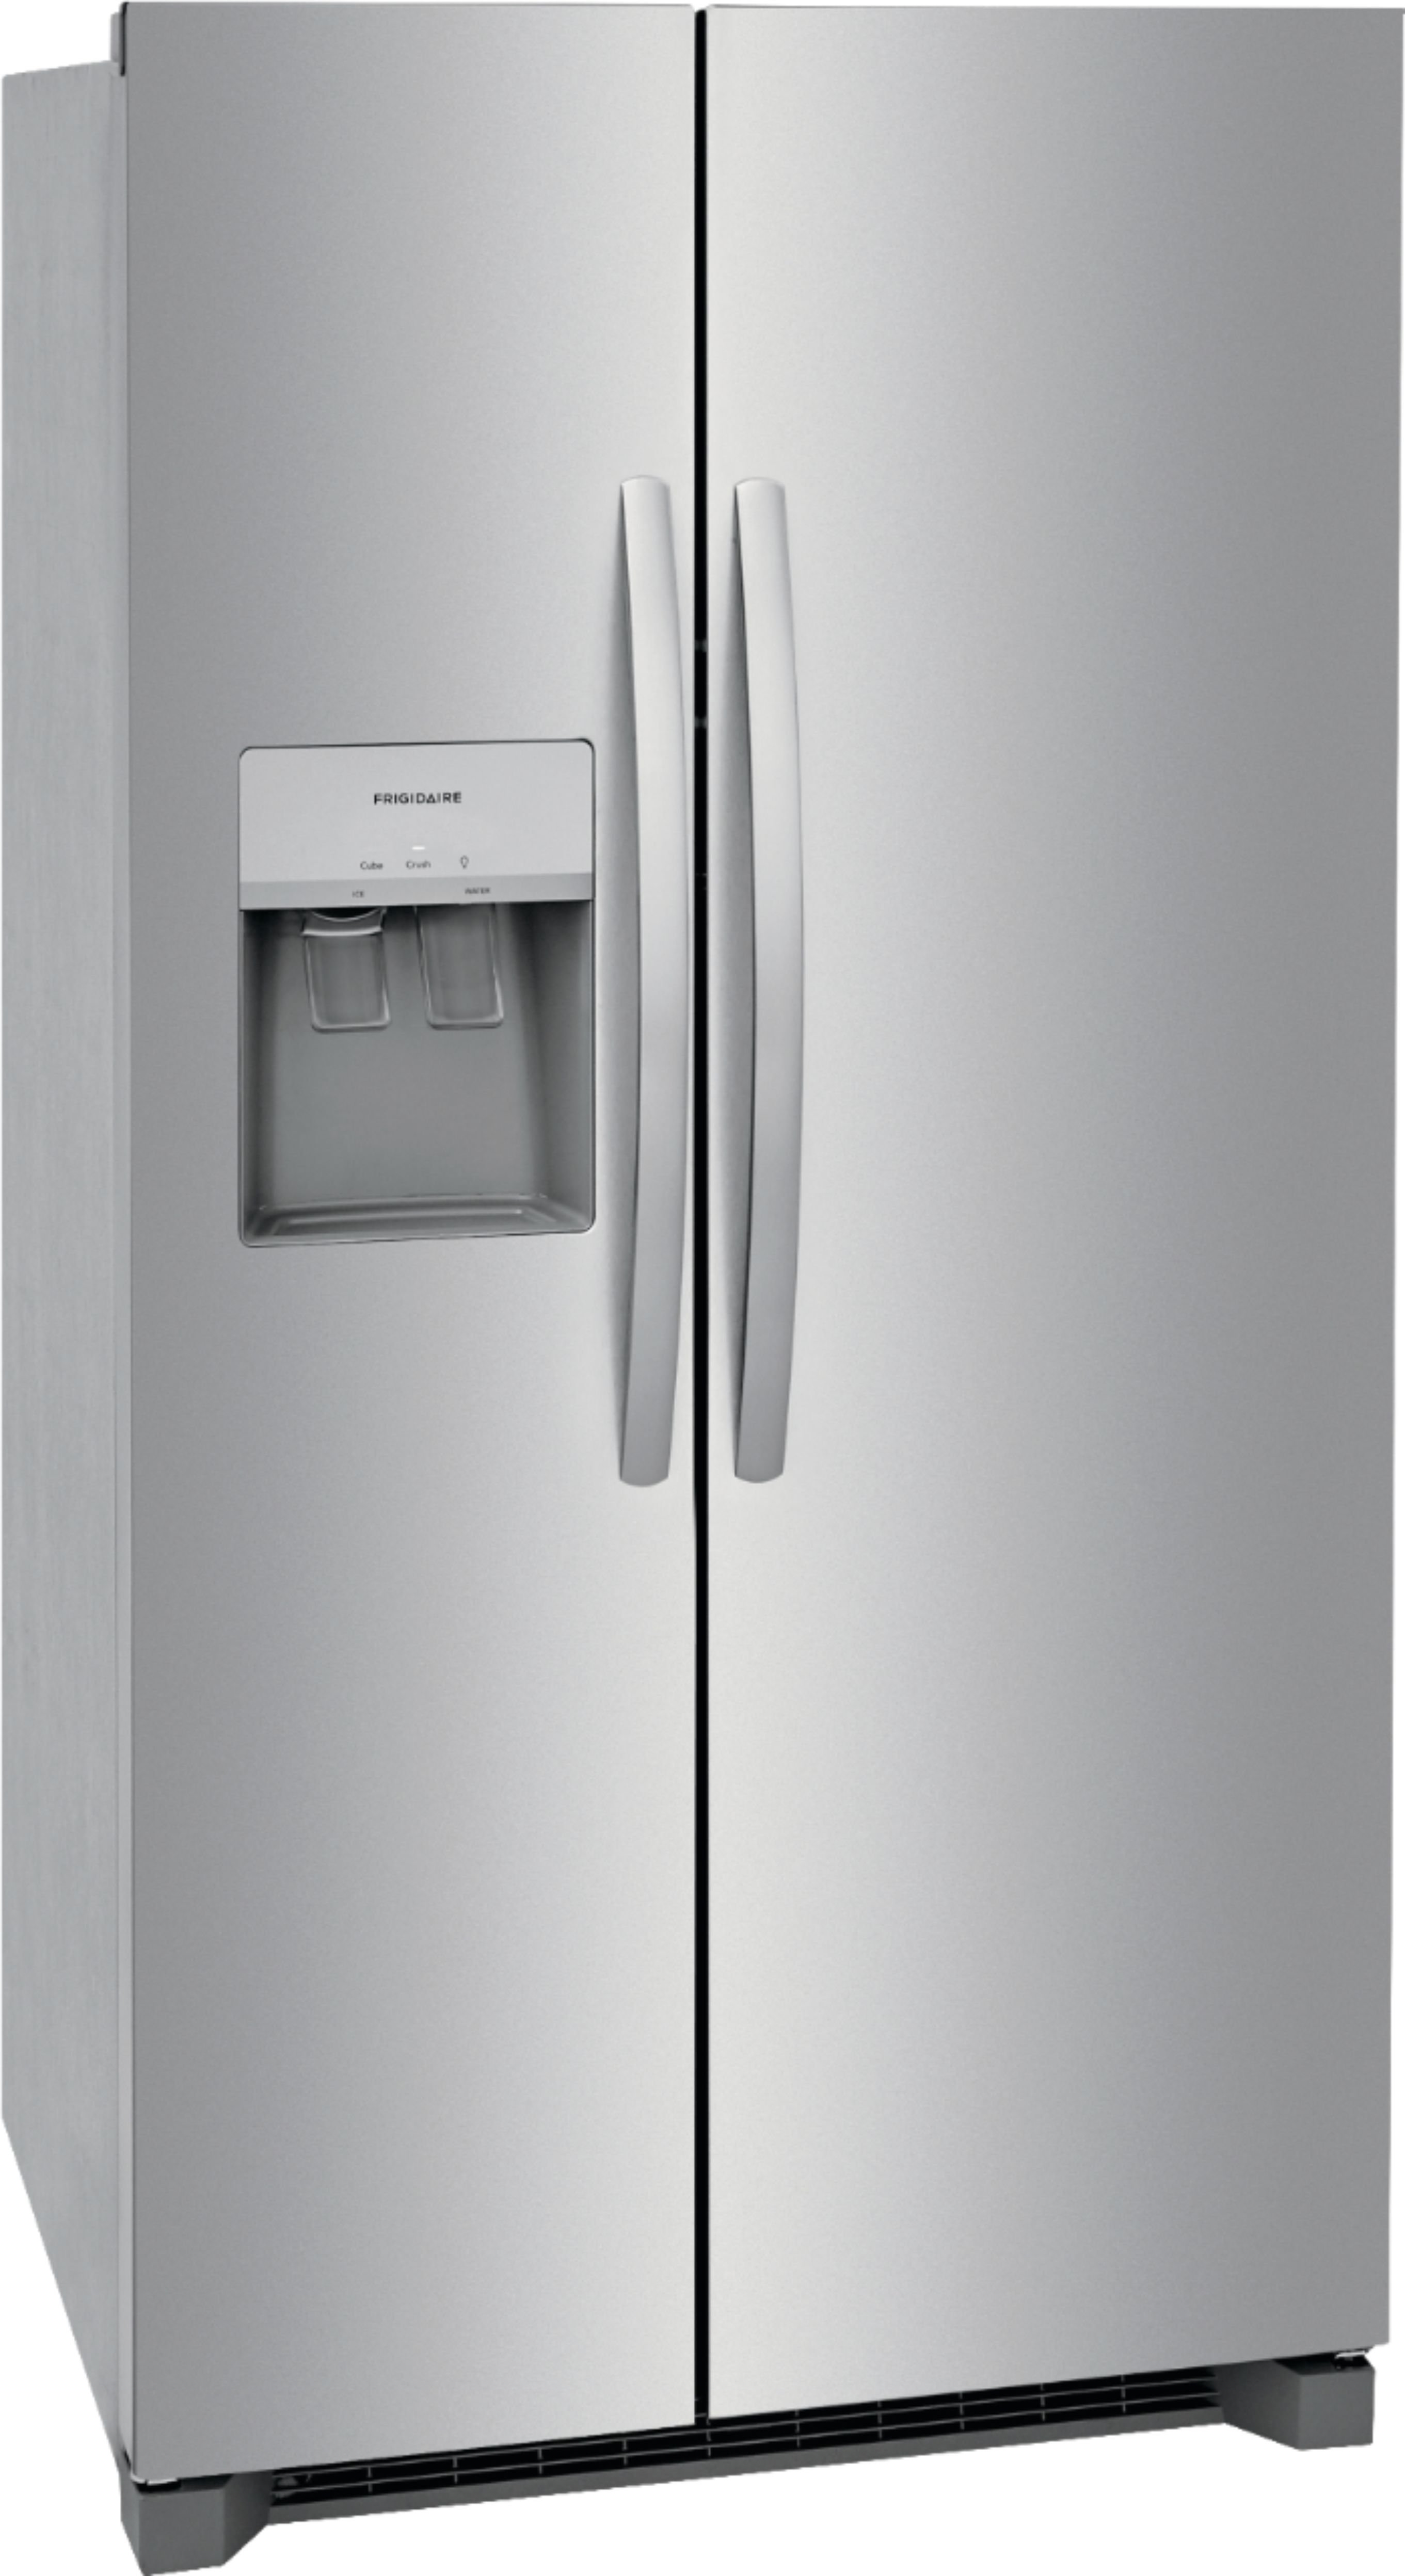 Angle View: Frigidaire - 25.6 Cu. Ft. Side-by-Side Refrigerator - Stainless steel